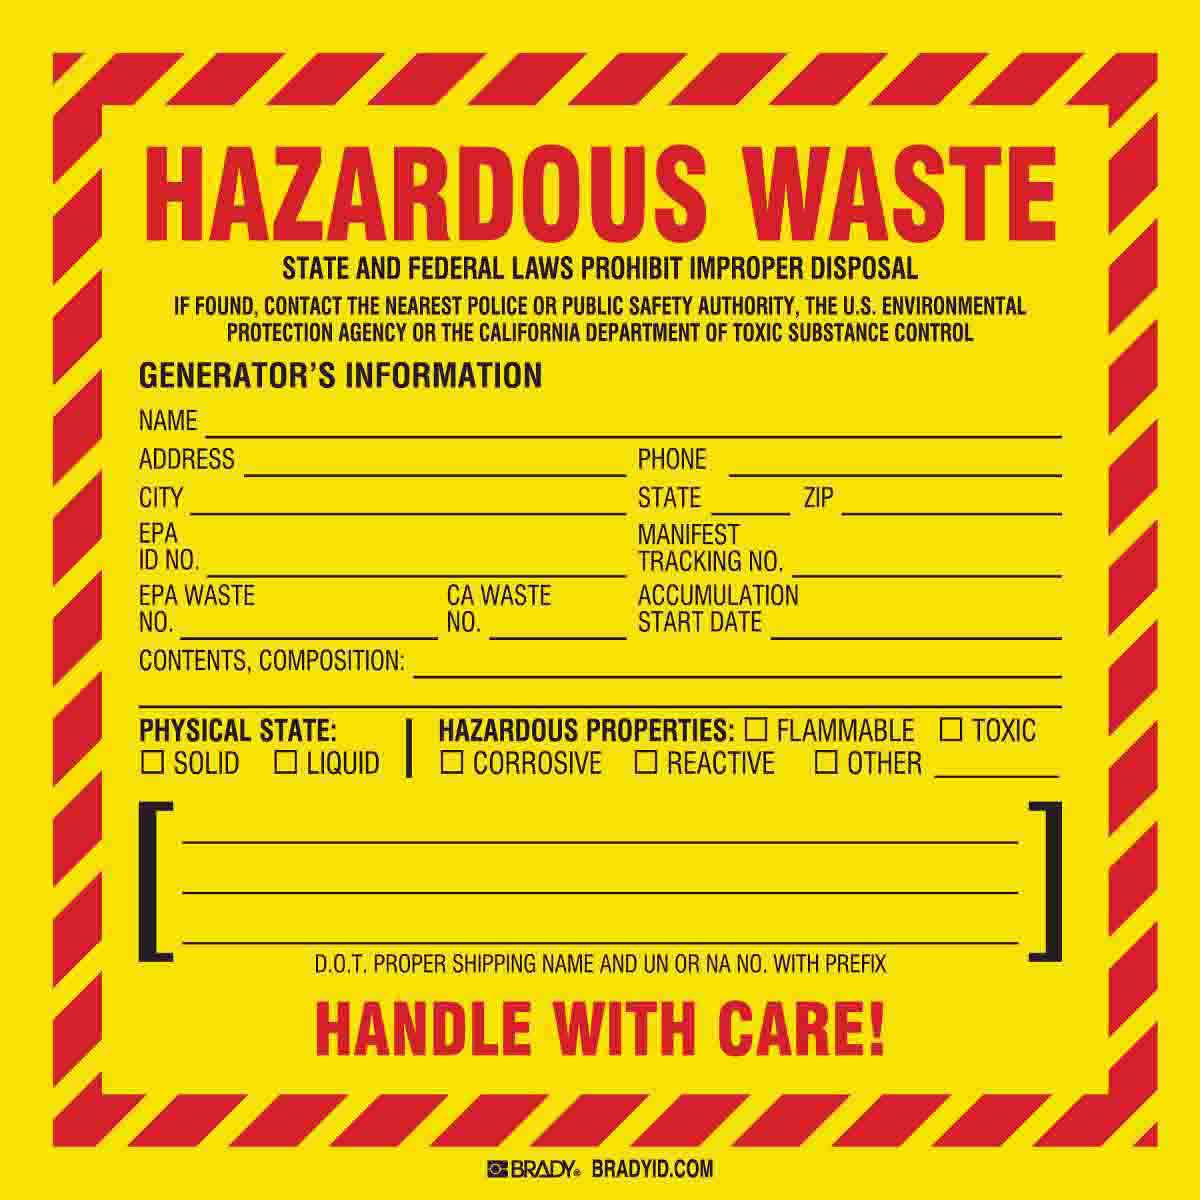 Brady Part Hazardous Waste Federal And Or State Laws Prohibit